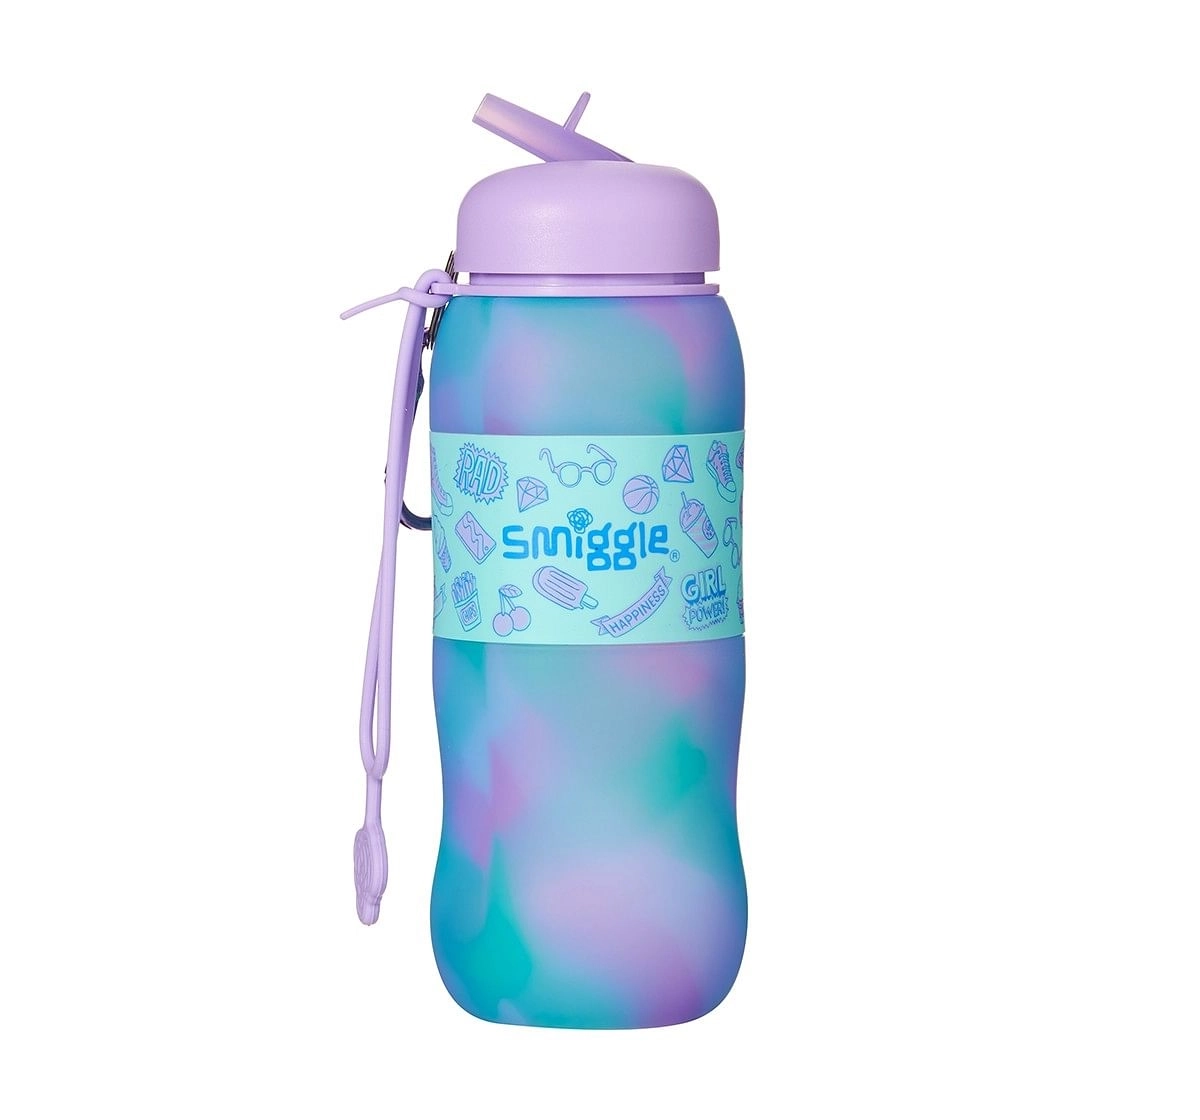 Smiggle Golly Silicone Roll Drink Bottle - Ice-cream Print Bags for Kids age 3Y+ (Lilac)